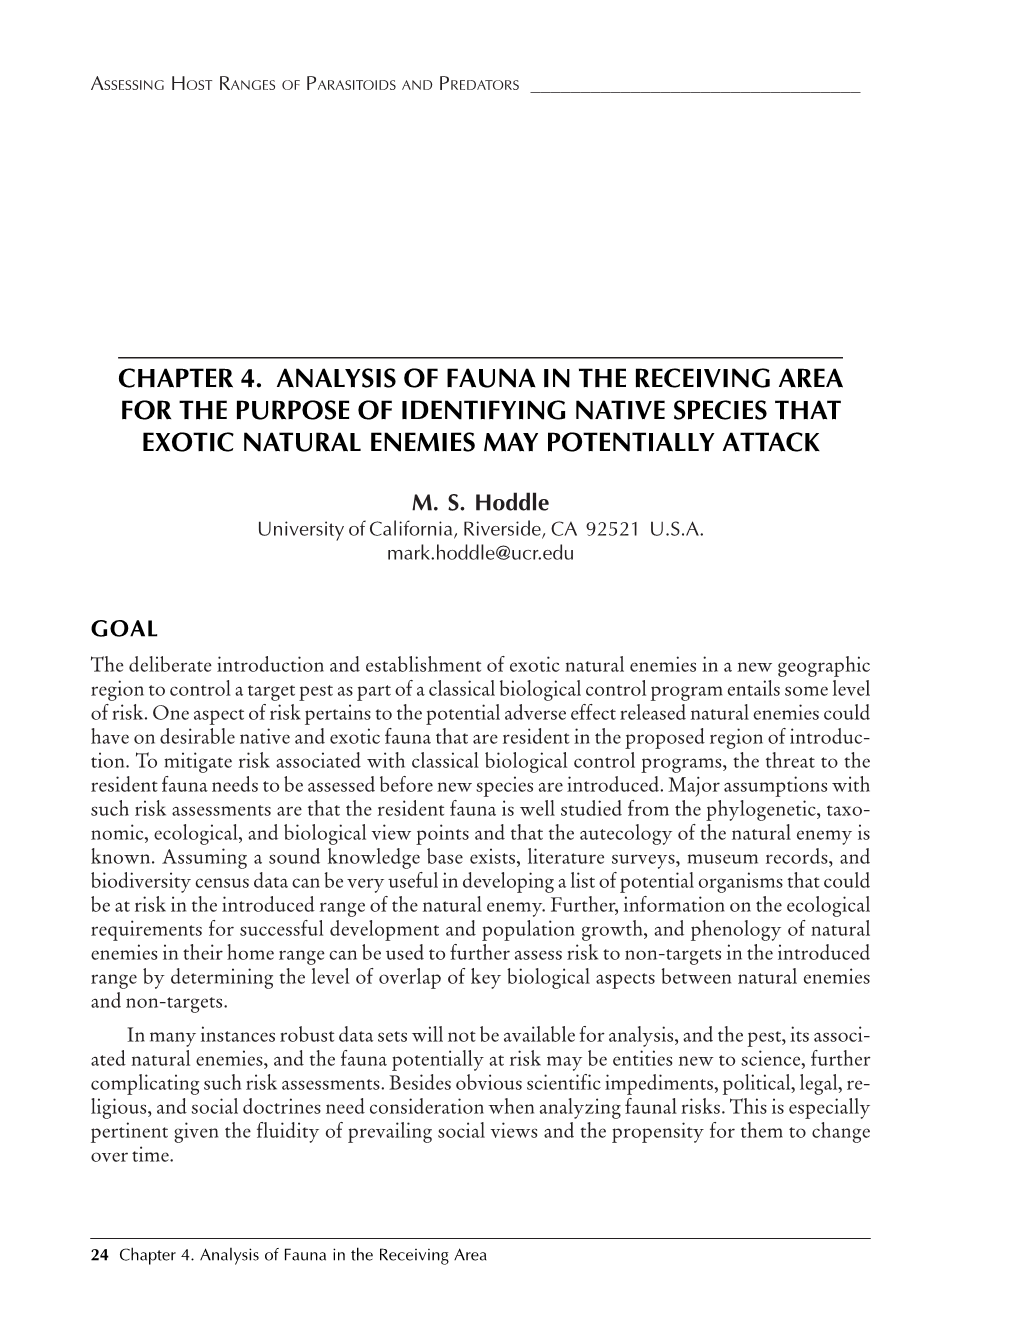 Chapter 4. Analysis of Fauna in the Receiving Area for the Purpose of Identifying Native Species That Exotic Natural Enemies May Potentially Attack